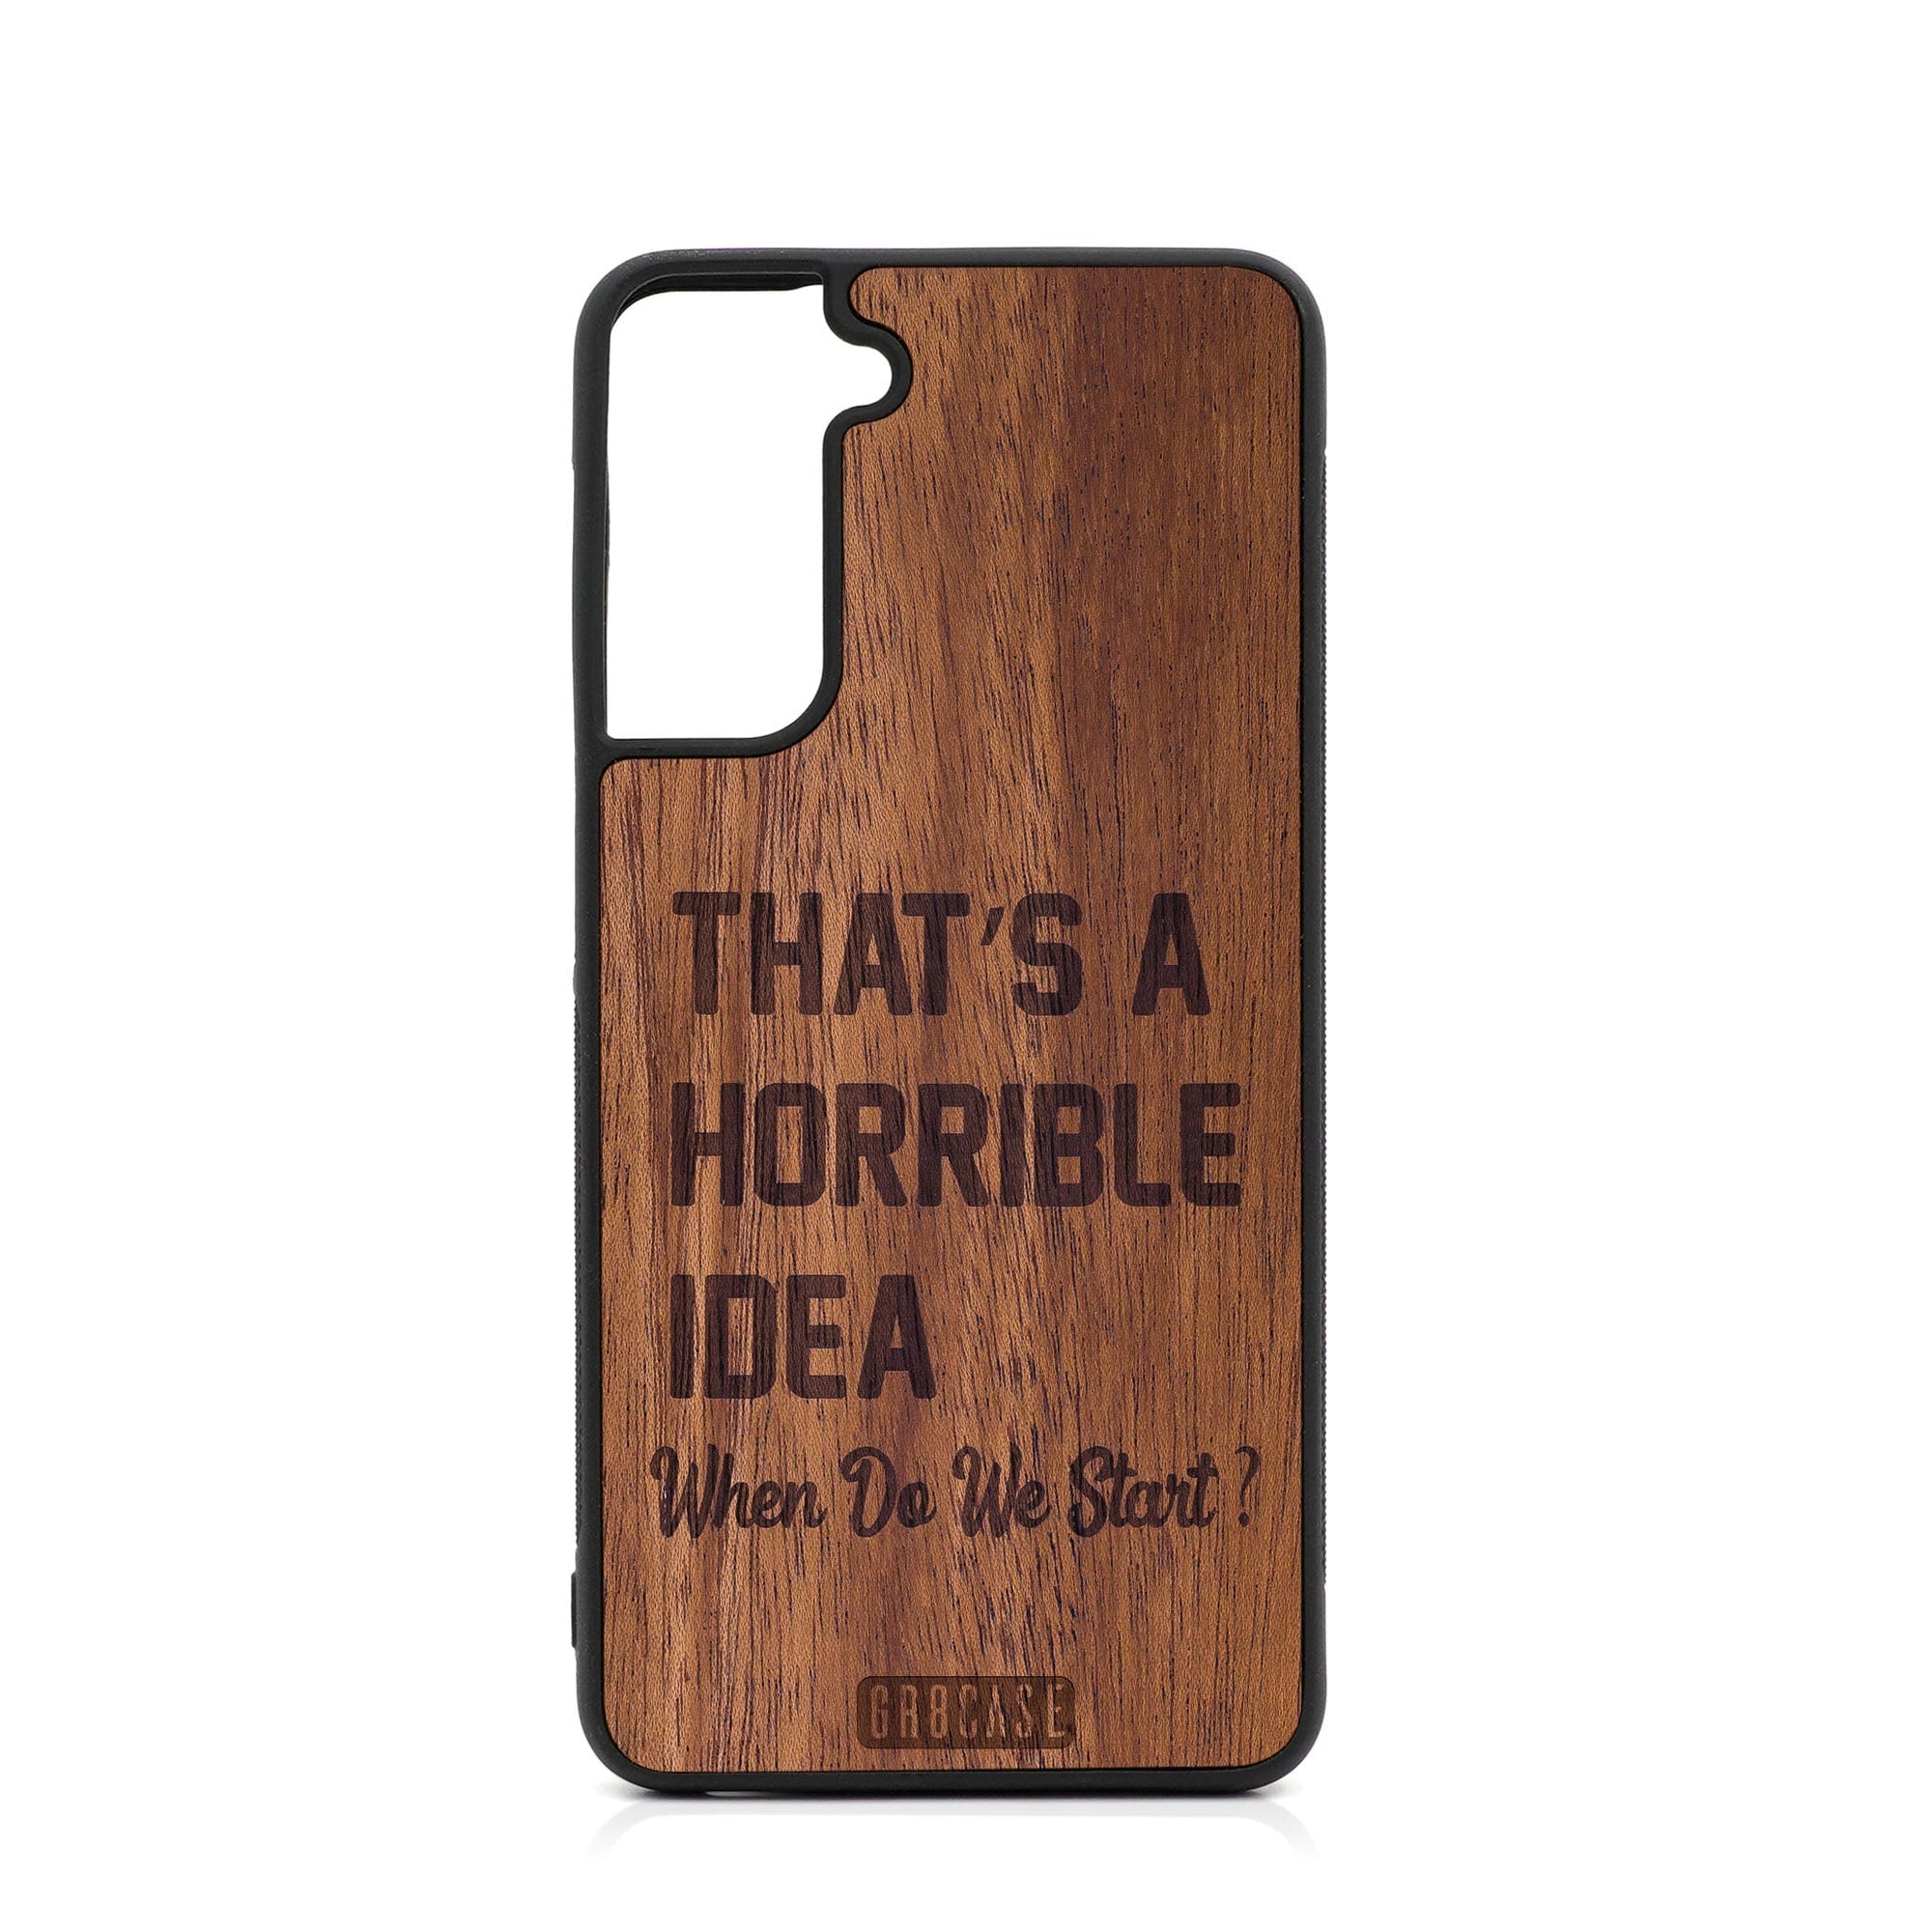 That's A Horrible Idea When Do We Start? Design Wood Case For Samsung Galaxy S21 FE 5G